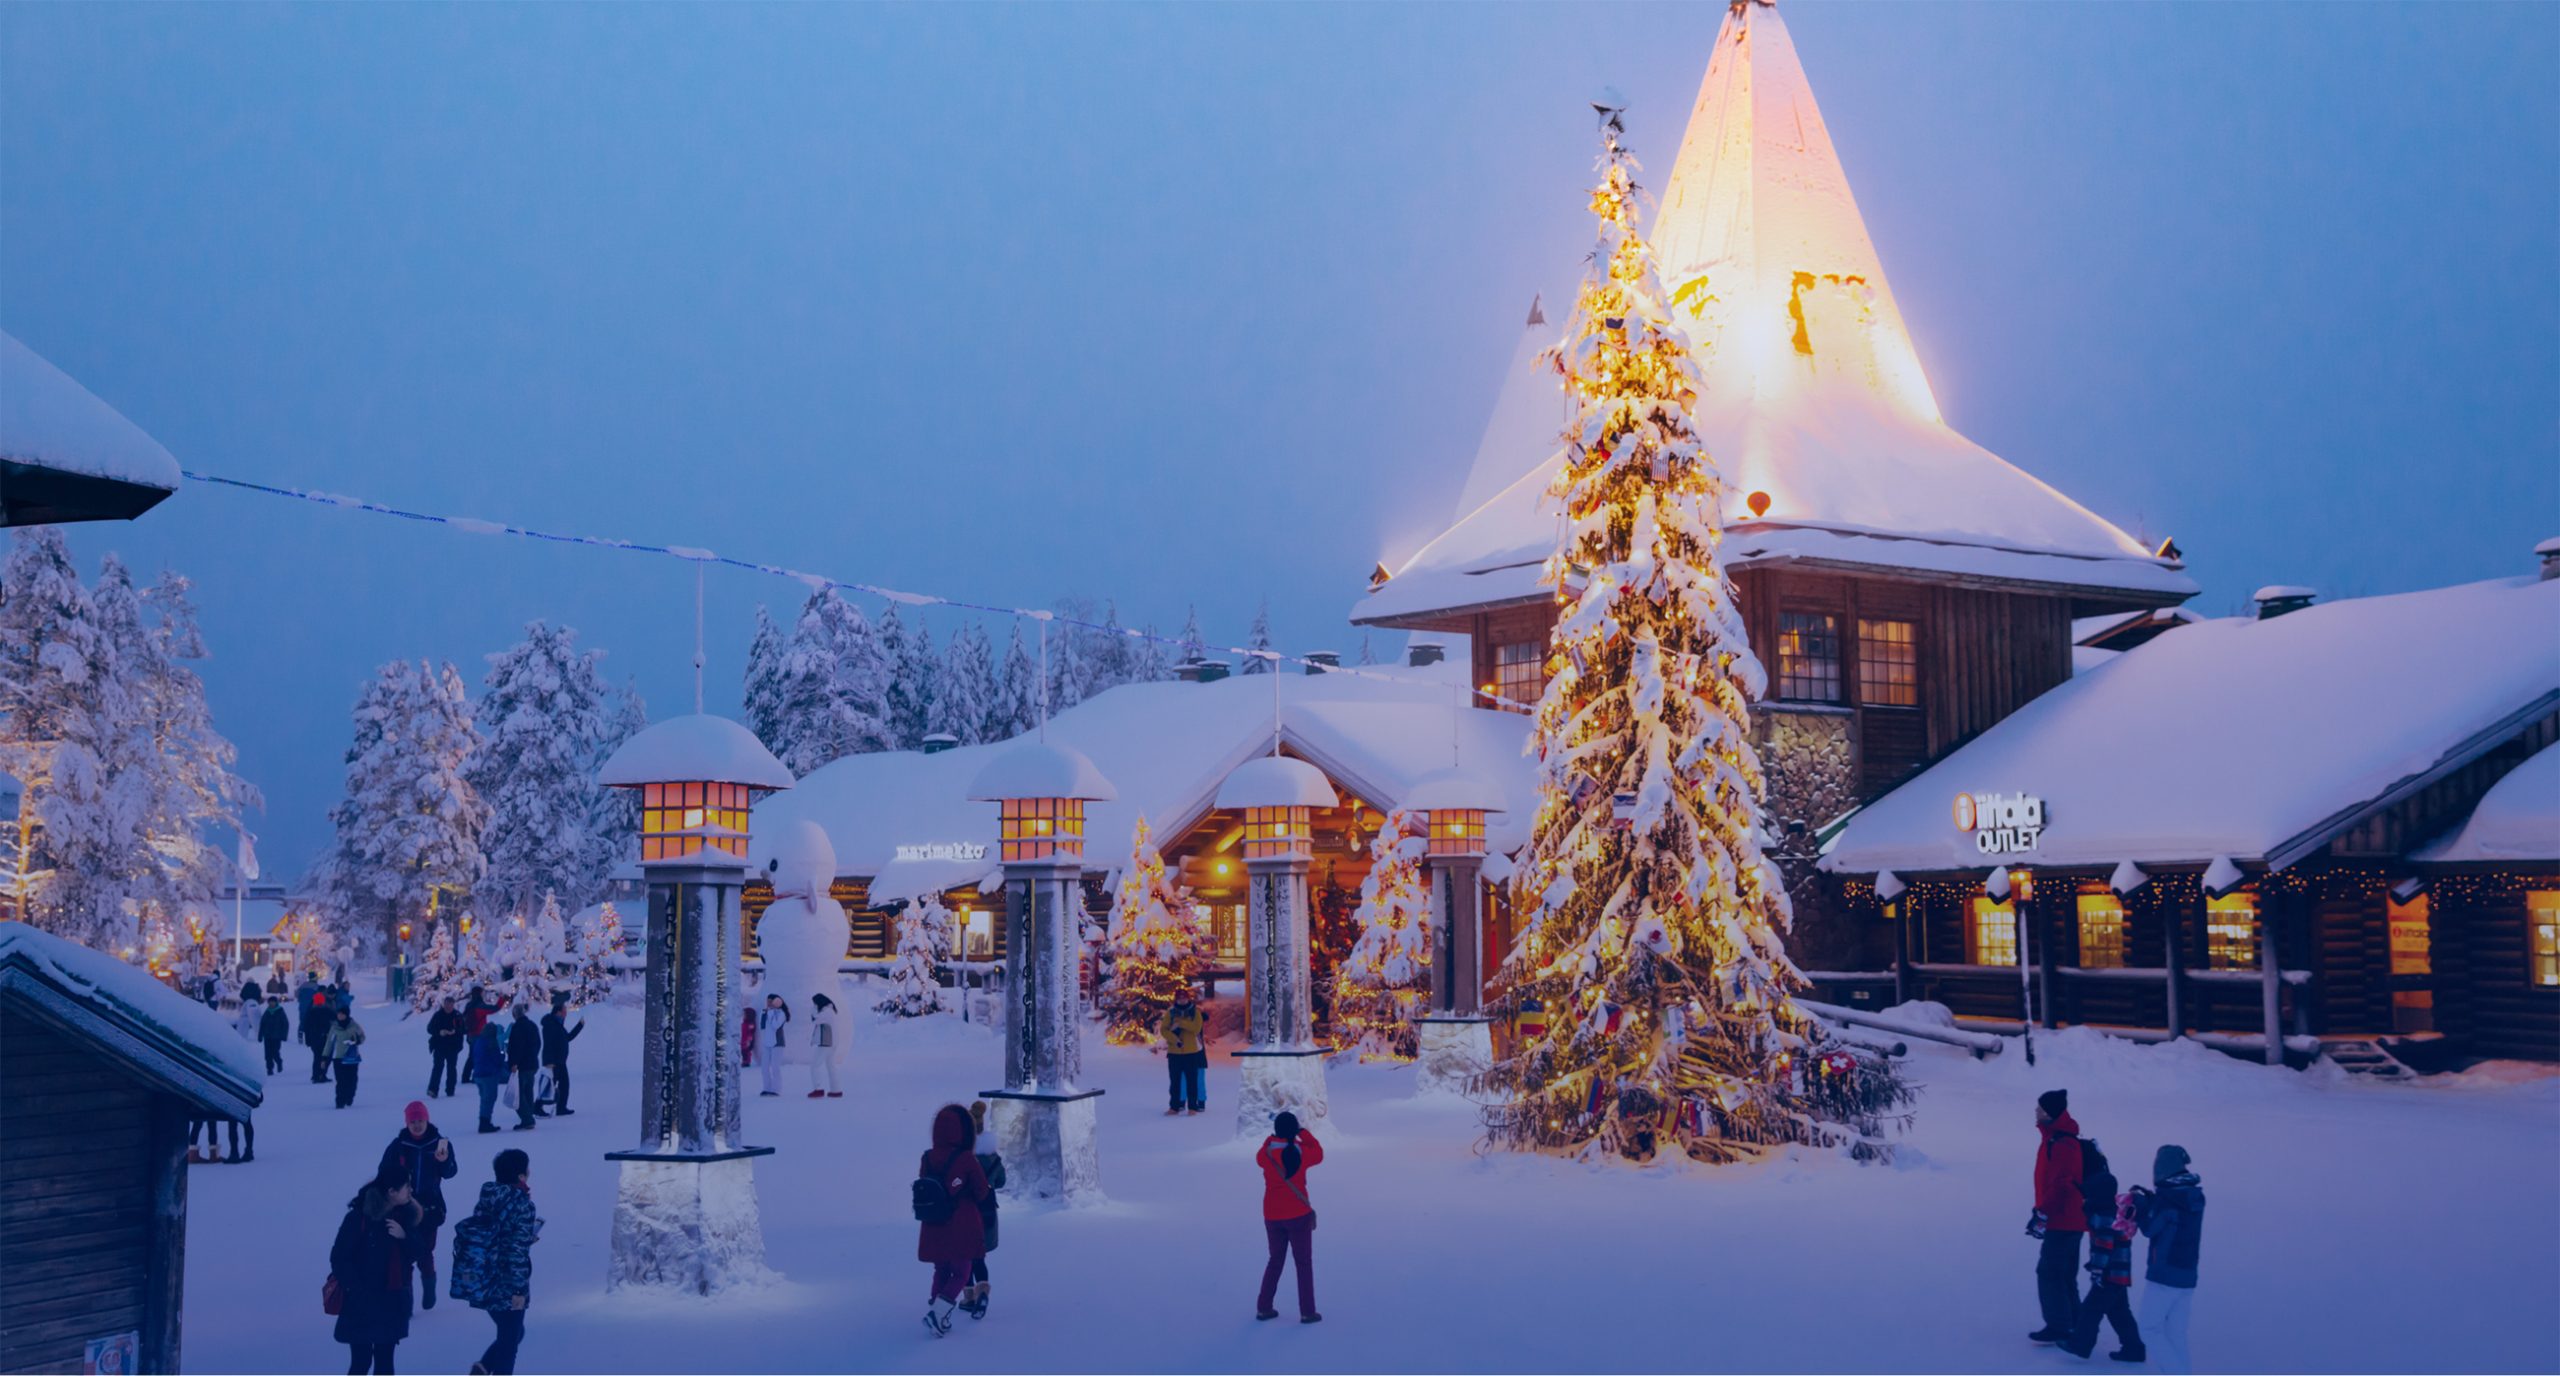 The Best Countries to Visit for Christmas